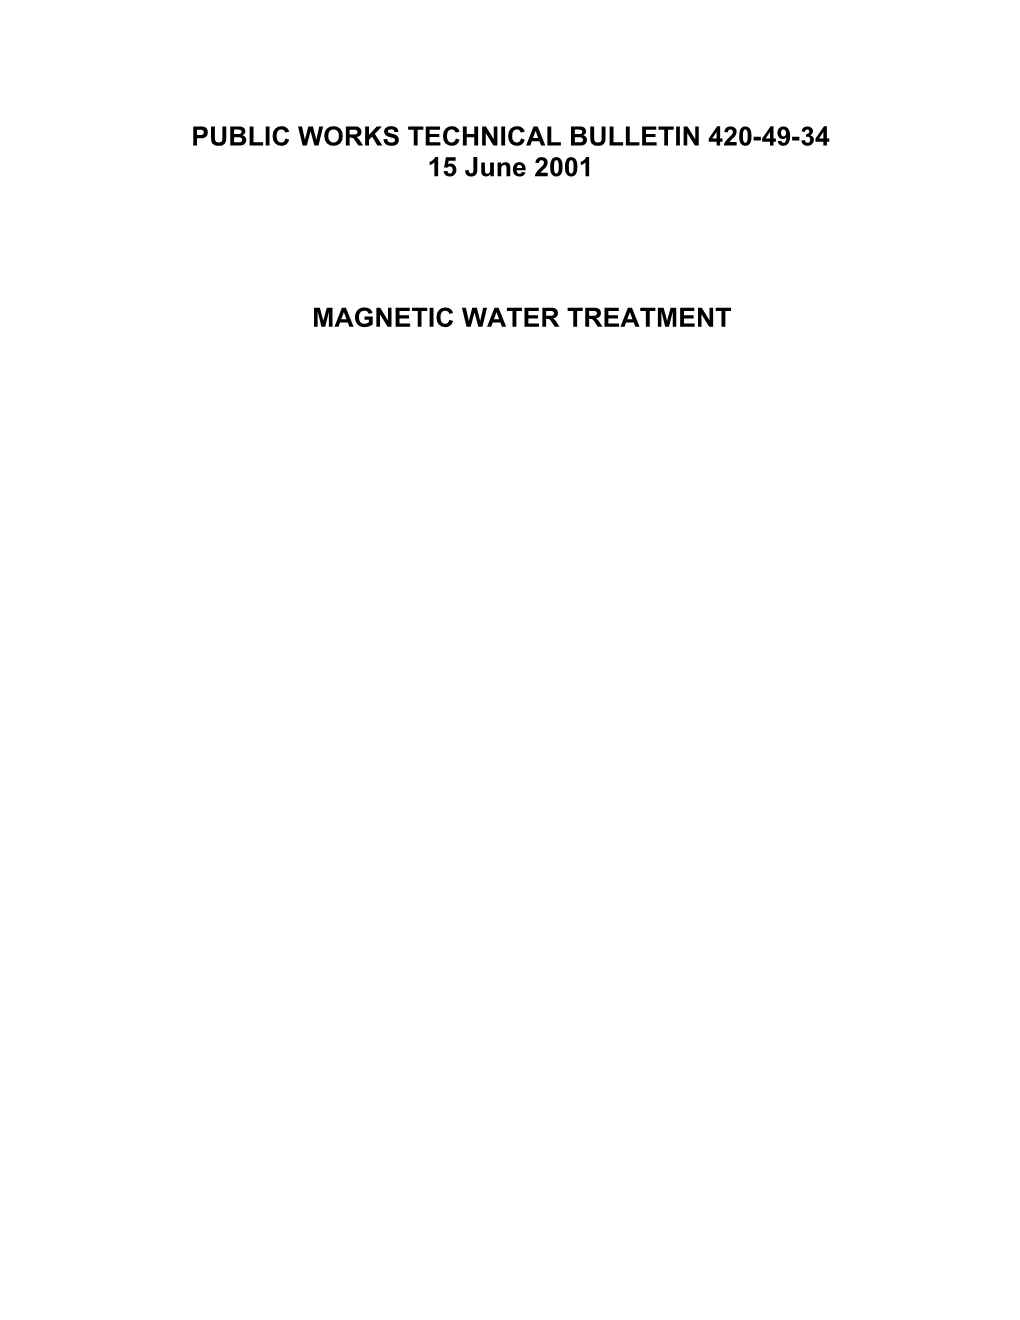 PUBLIC WORKS TECHNICAL BULLETIN 420-49-34 15 June 2001 MAGNETIC WATER TREATMENT